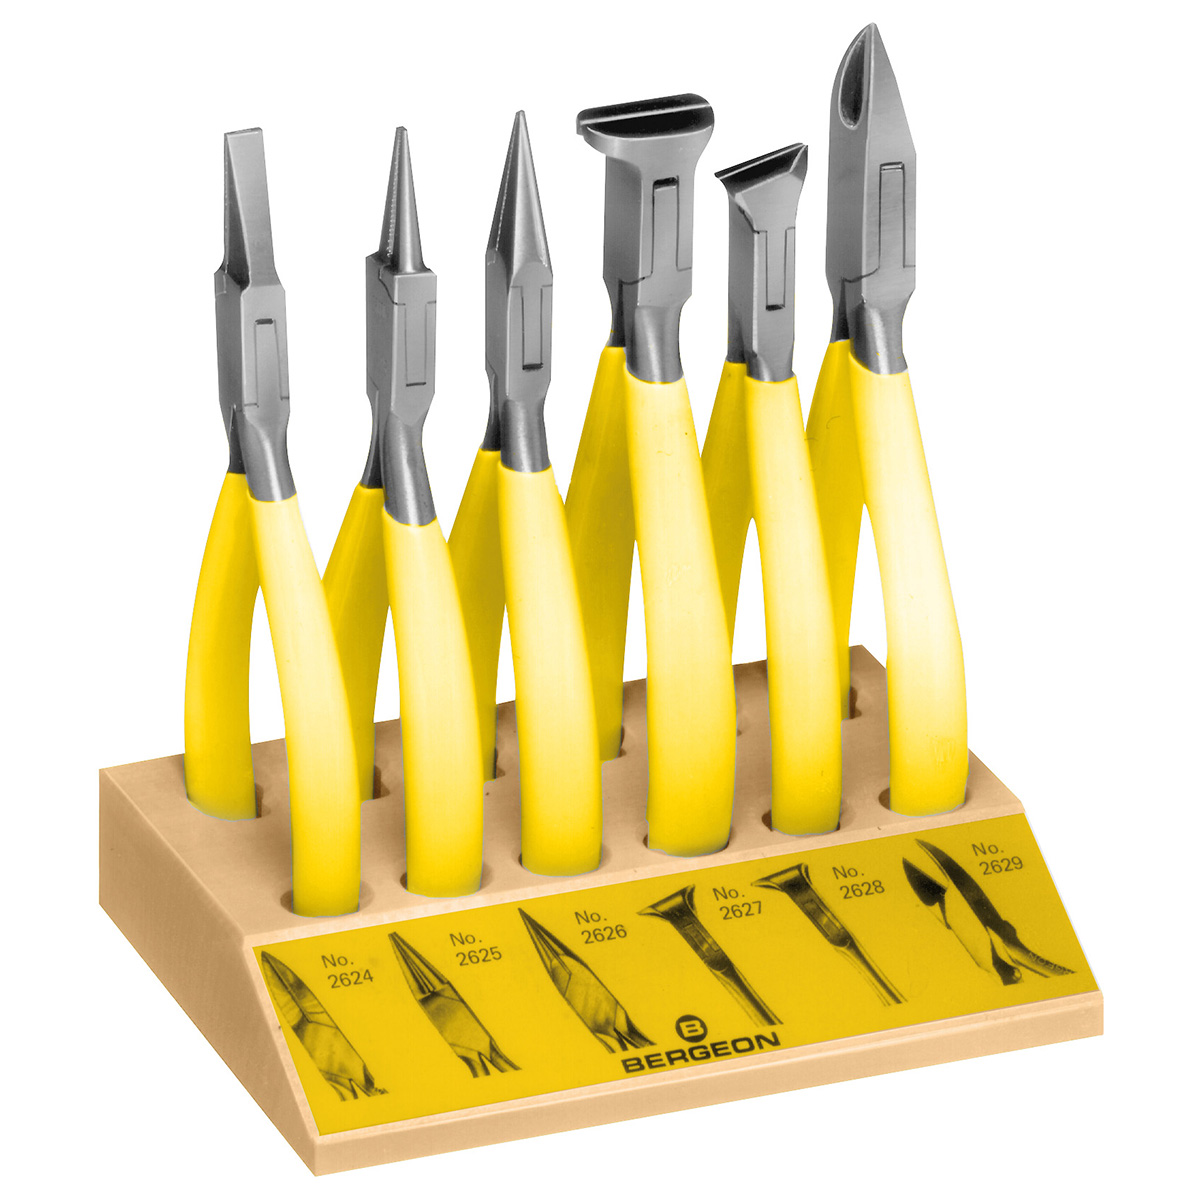 Bergeon 6283-D Assortment of 6 pliers non-corrugated nose